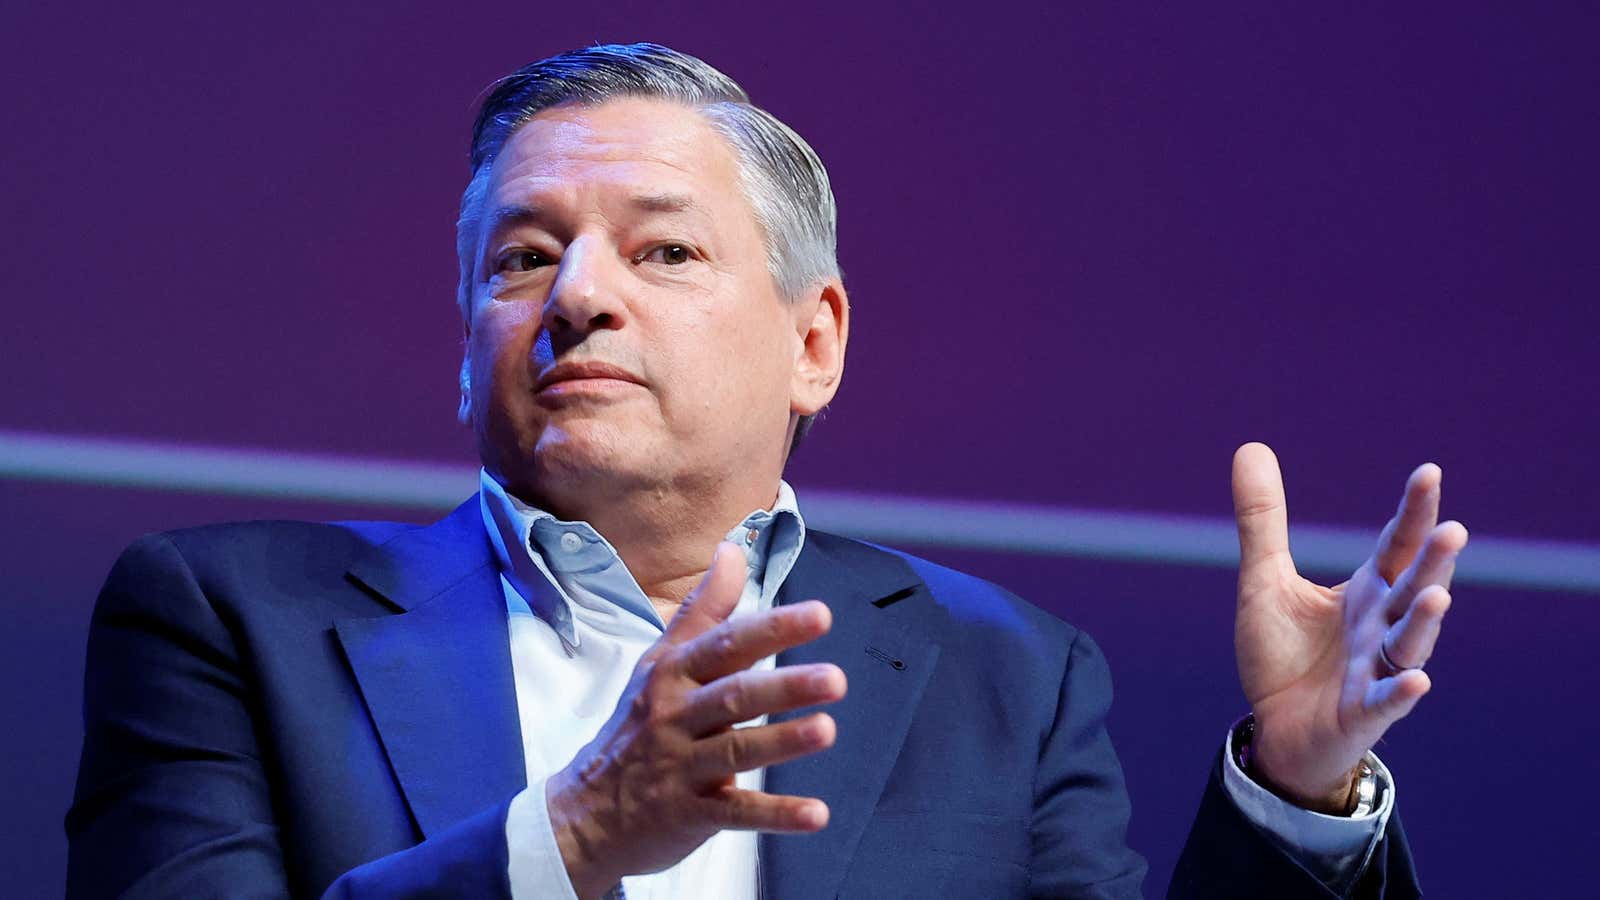 Netflix co-CEO Ted Sarandos speaks at Cannes Lions.